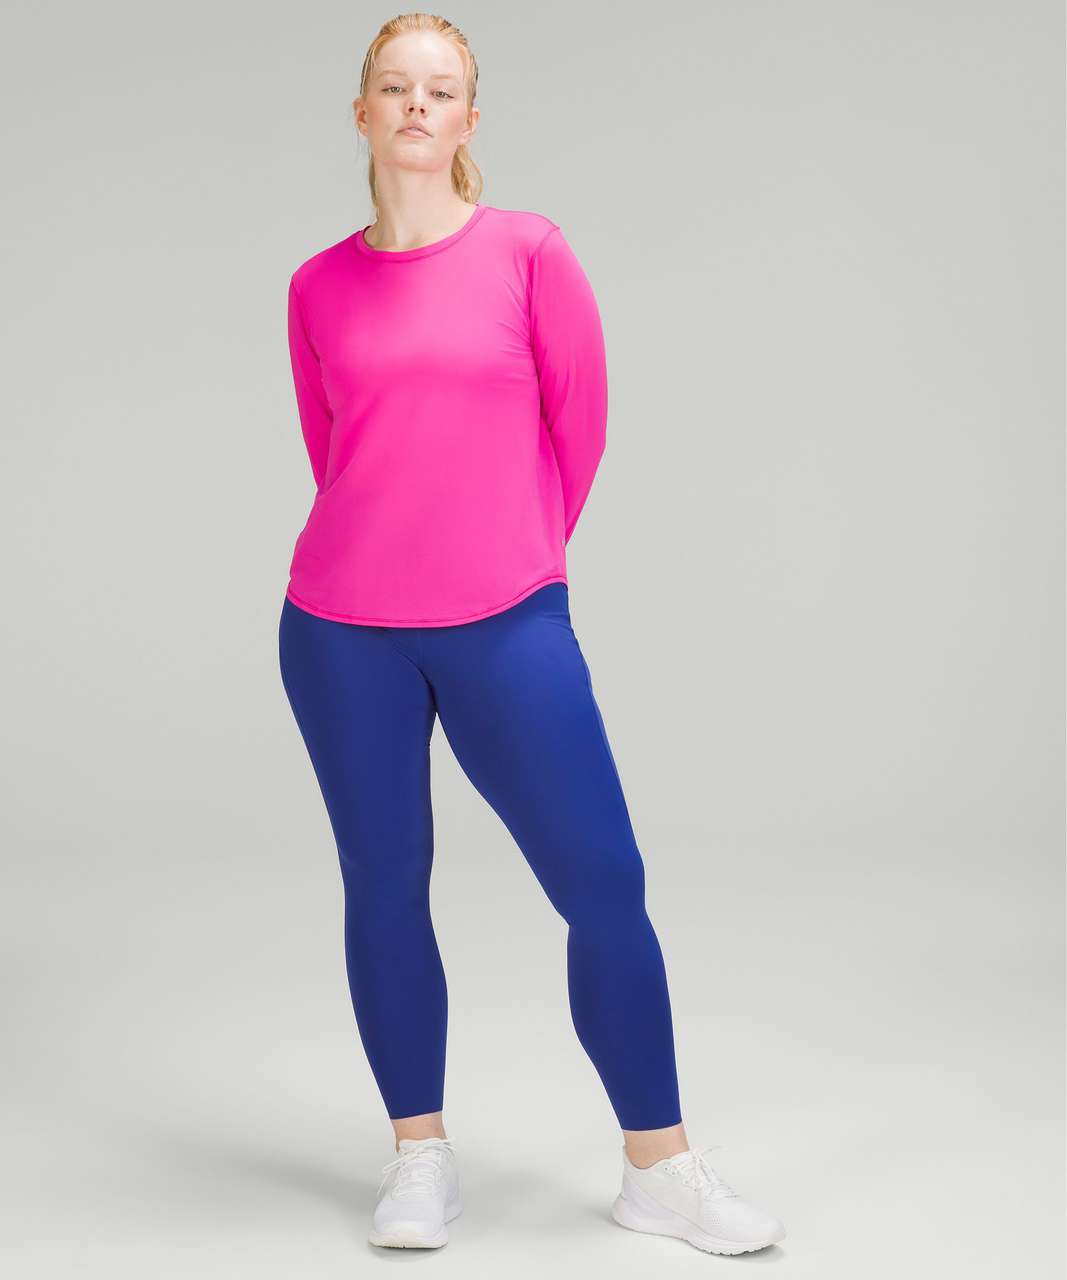 Lululemon Base Pace High-Rise Running Tight 28" - Psychic